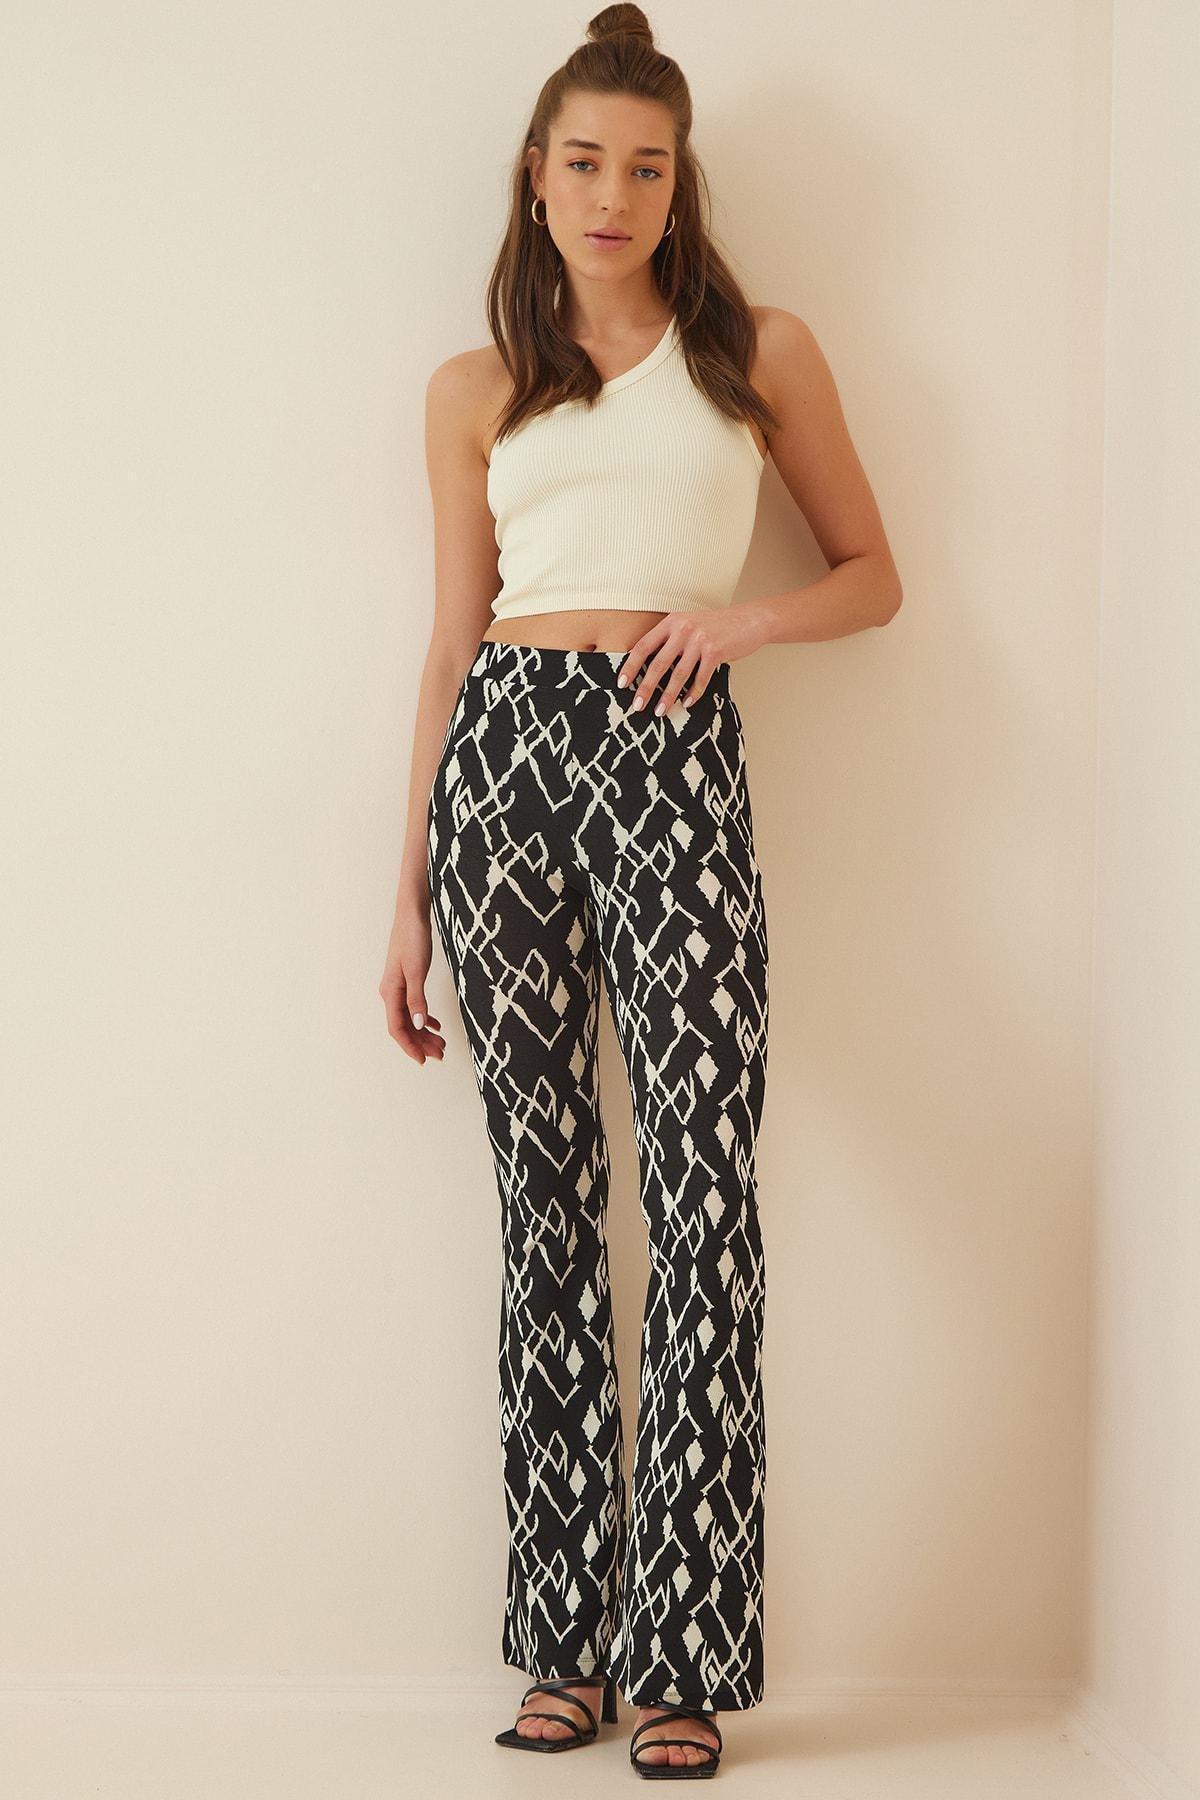 Happiness Istanbul - Black Patterned Bootcut Pants